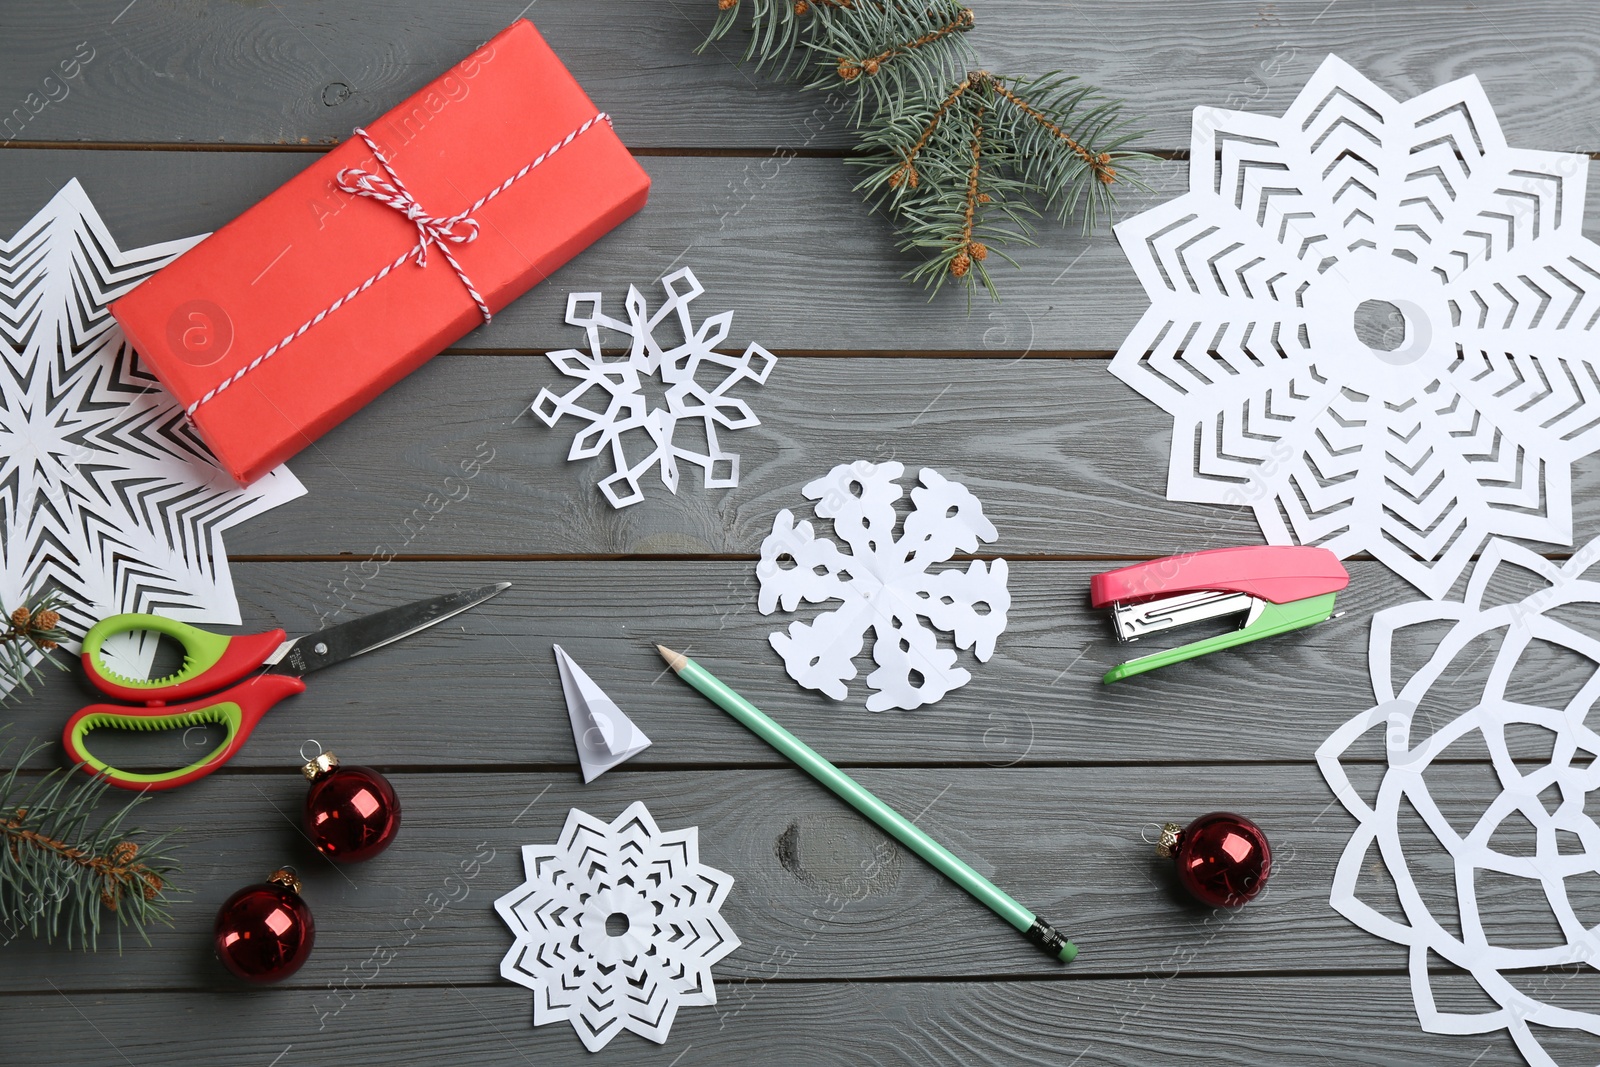 Photo of Flat lay composition with paper snowflakes on grey wooden table